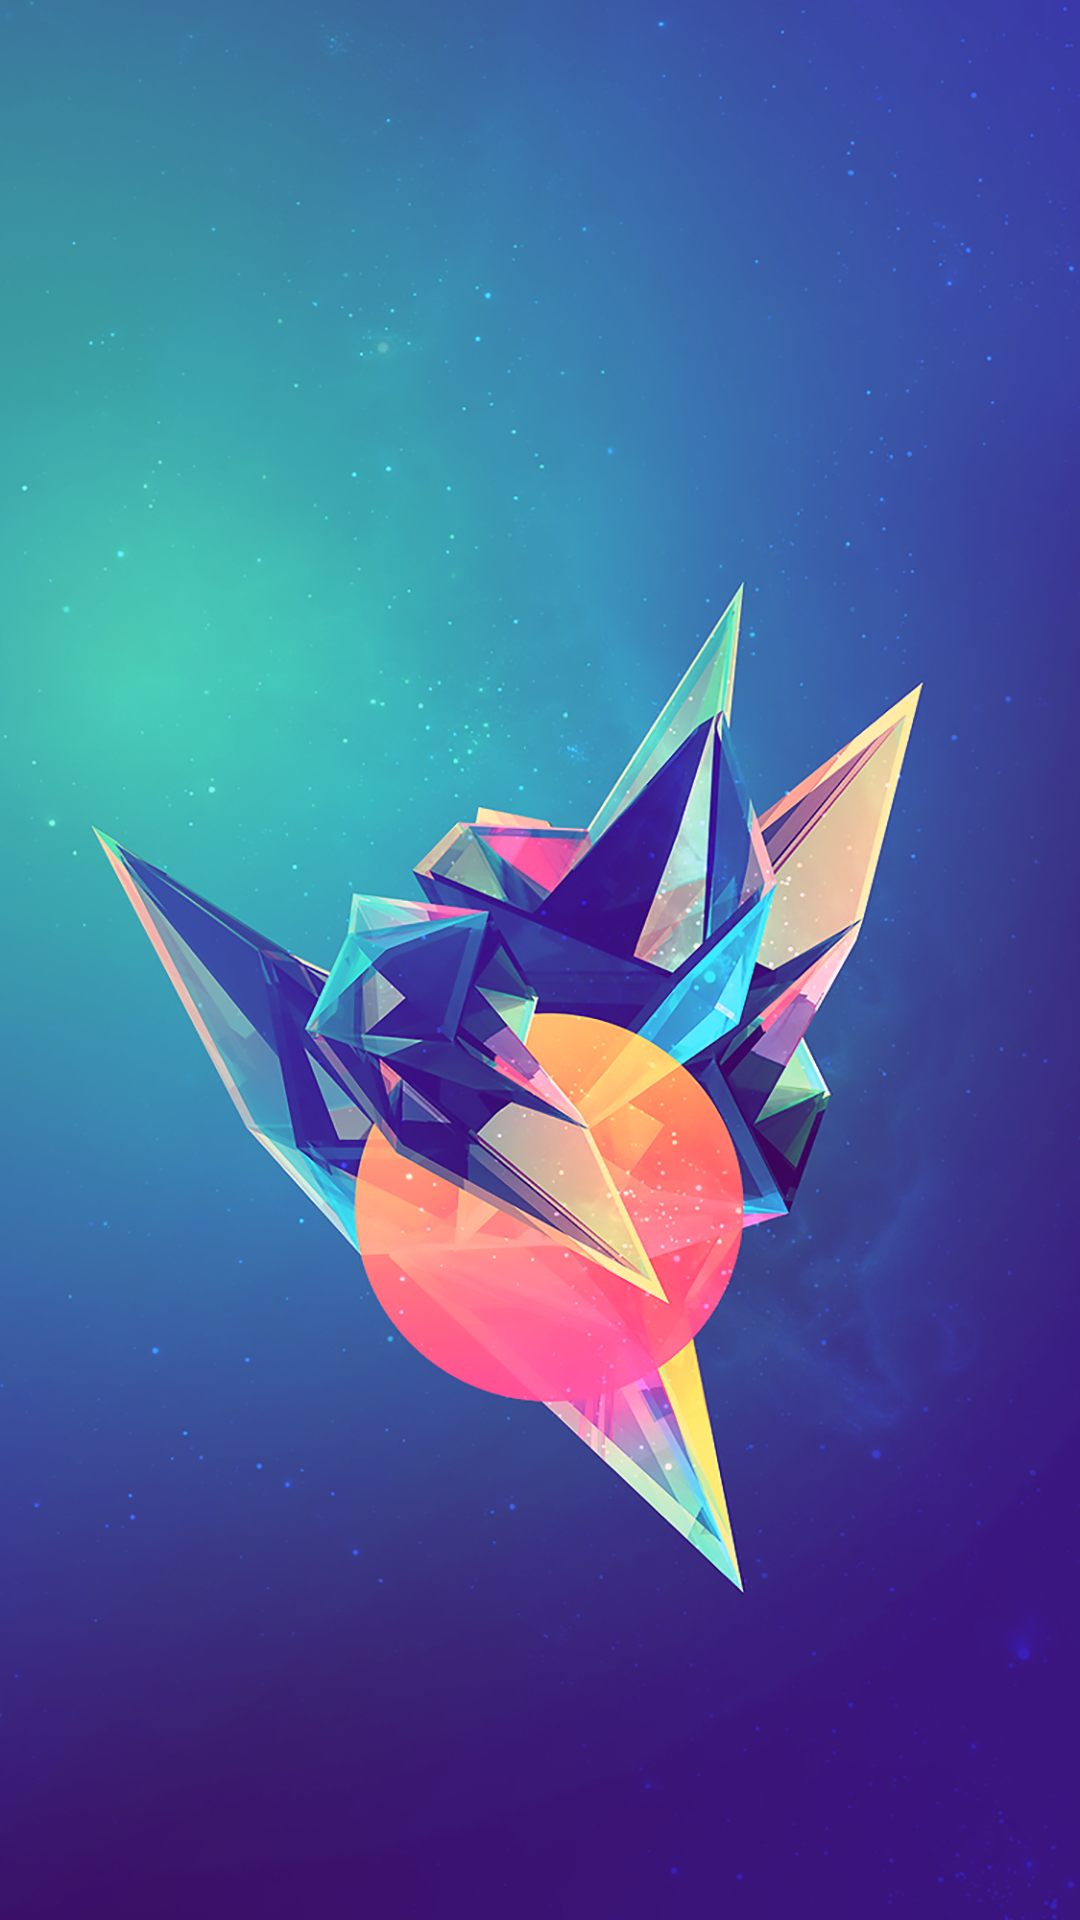 ↑↑TAP AND GET THE FREE APP! Art Creative Abstract Blue Pink